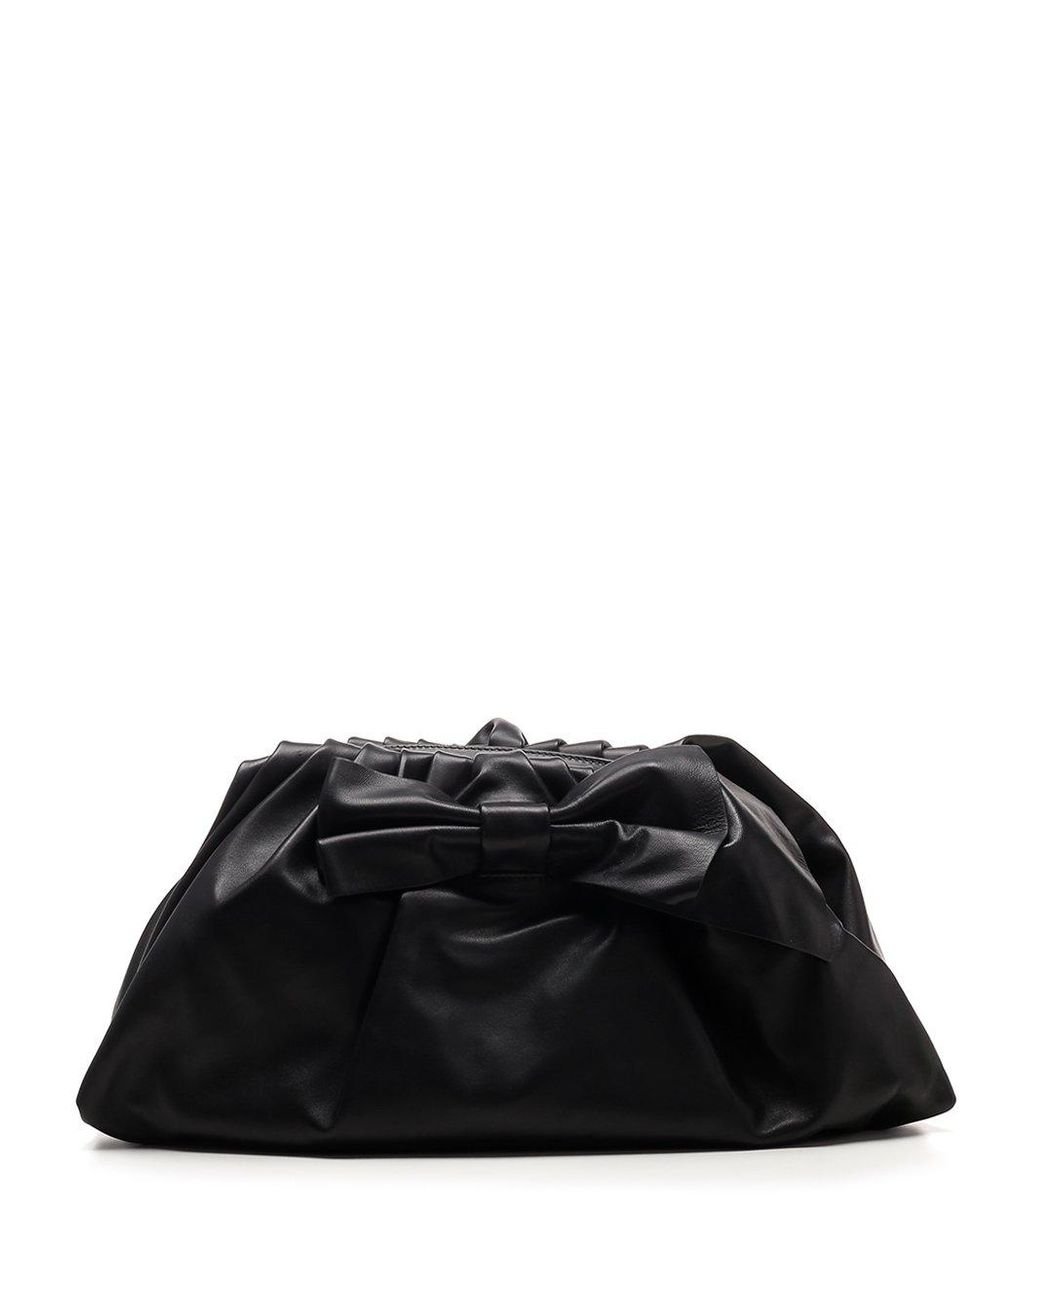 RED Valentino Leather Redvalentino Bow Large Clutch Bag in Black - Lyst